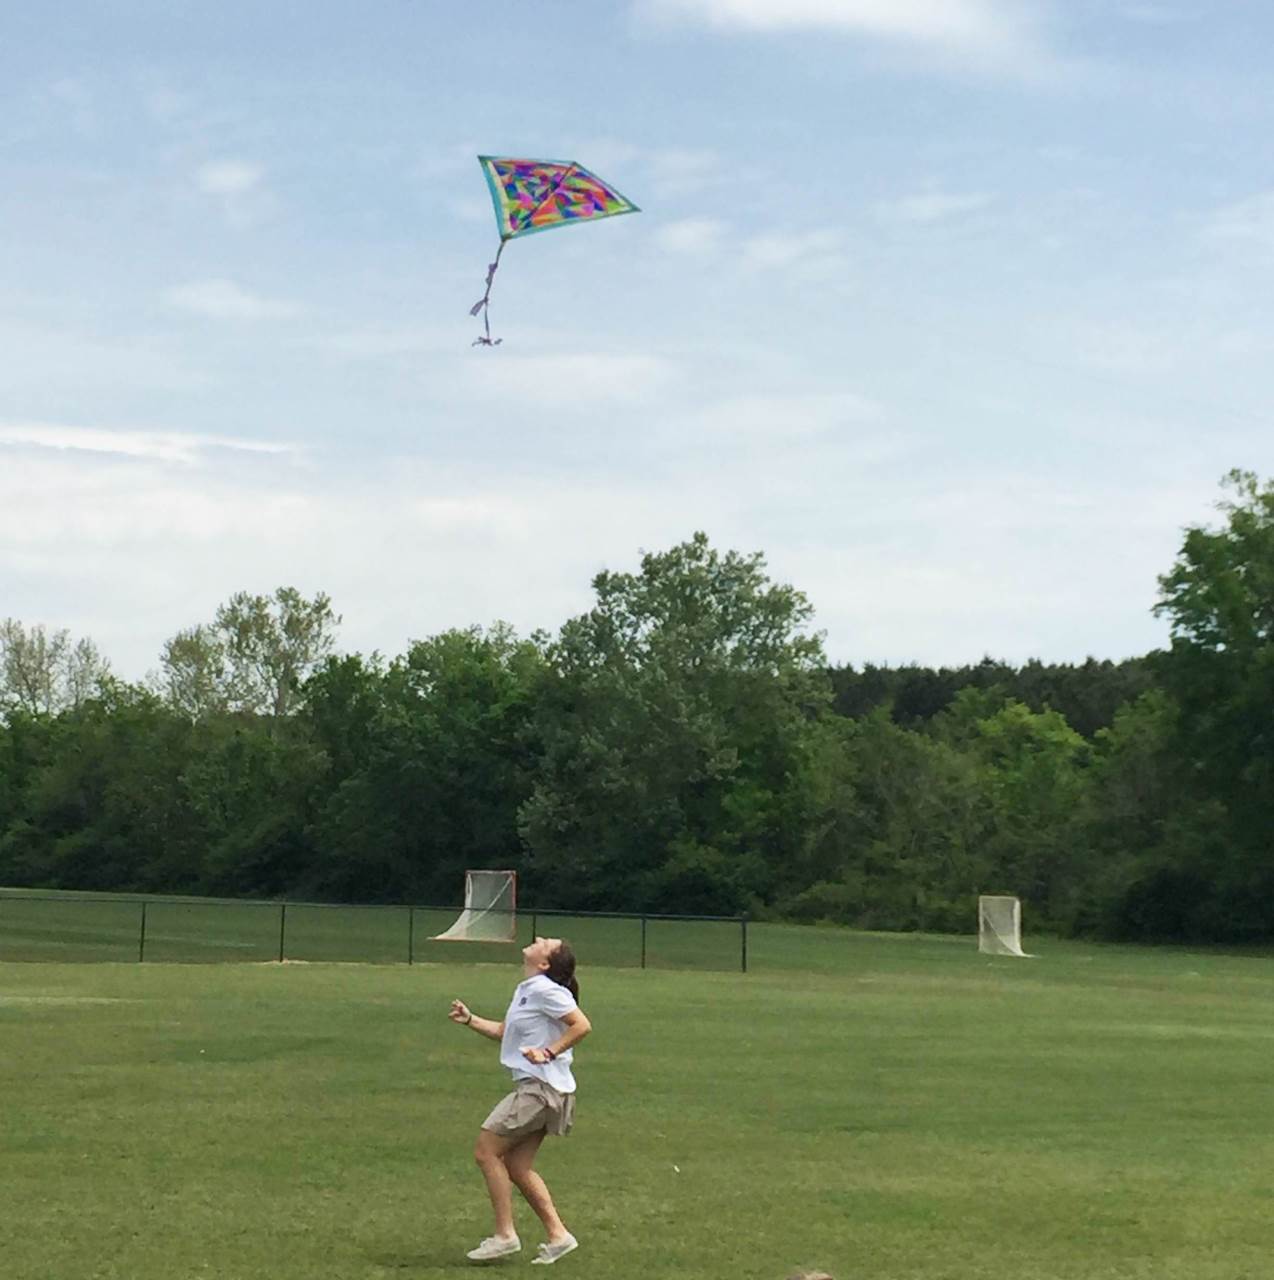 let-s-go-fly-a-kite-lessons-in-honors-geometry